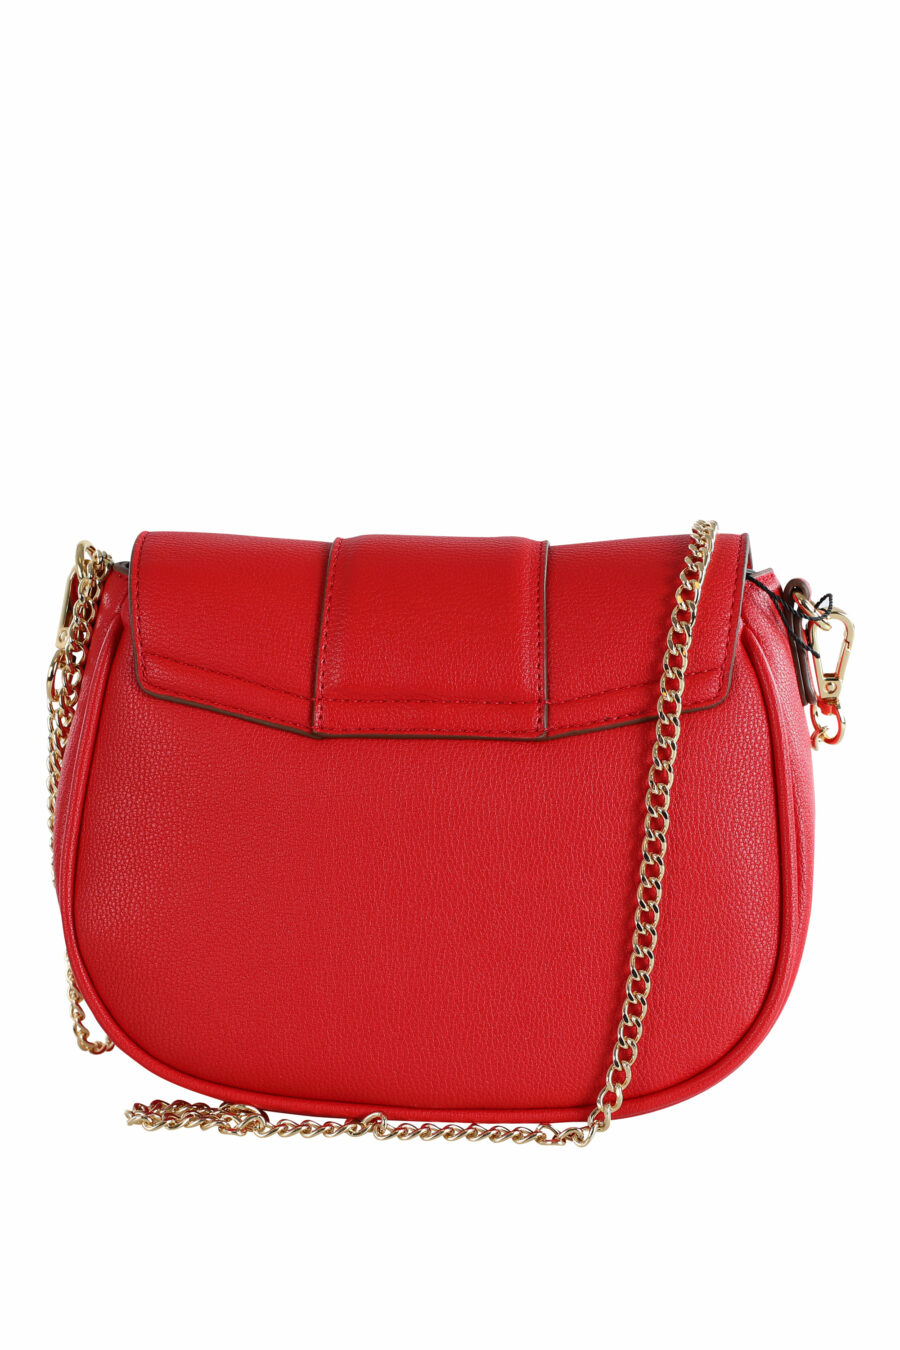 Red shoulder bag with mini logo and hearts in golden metal - IMG 3622